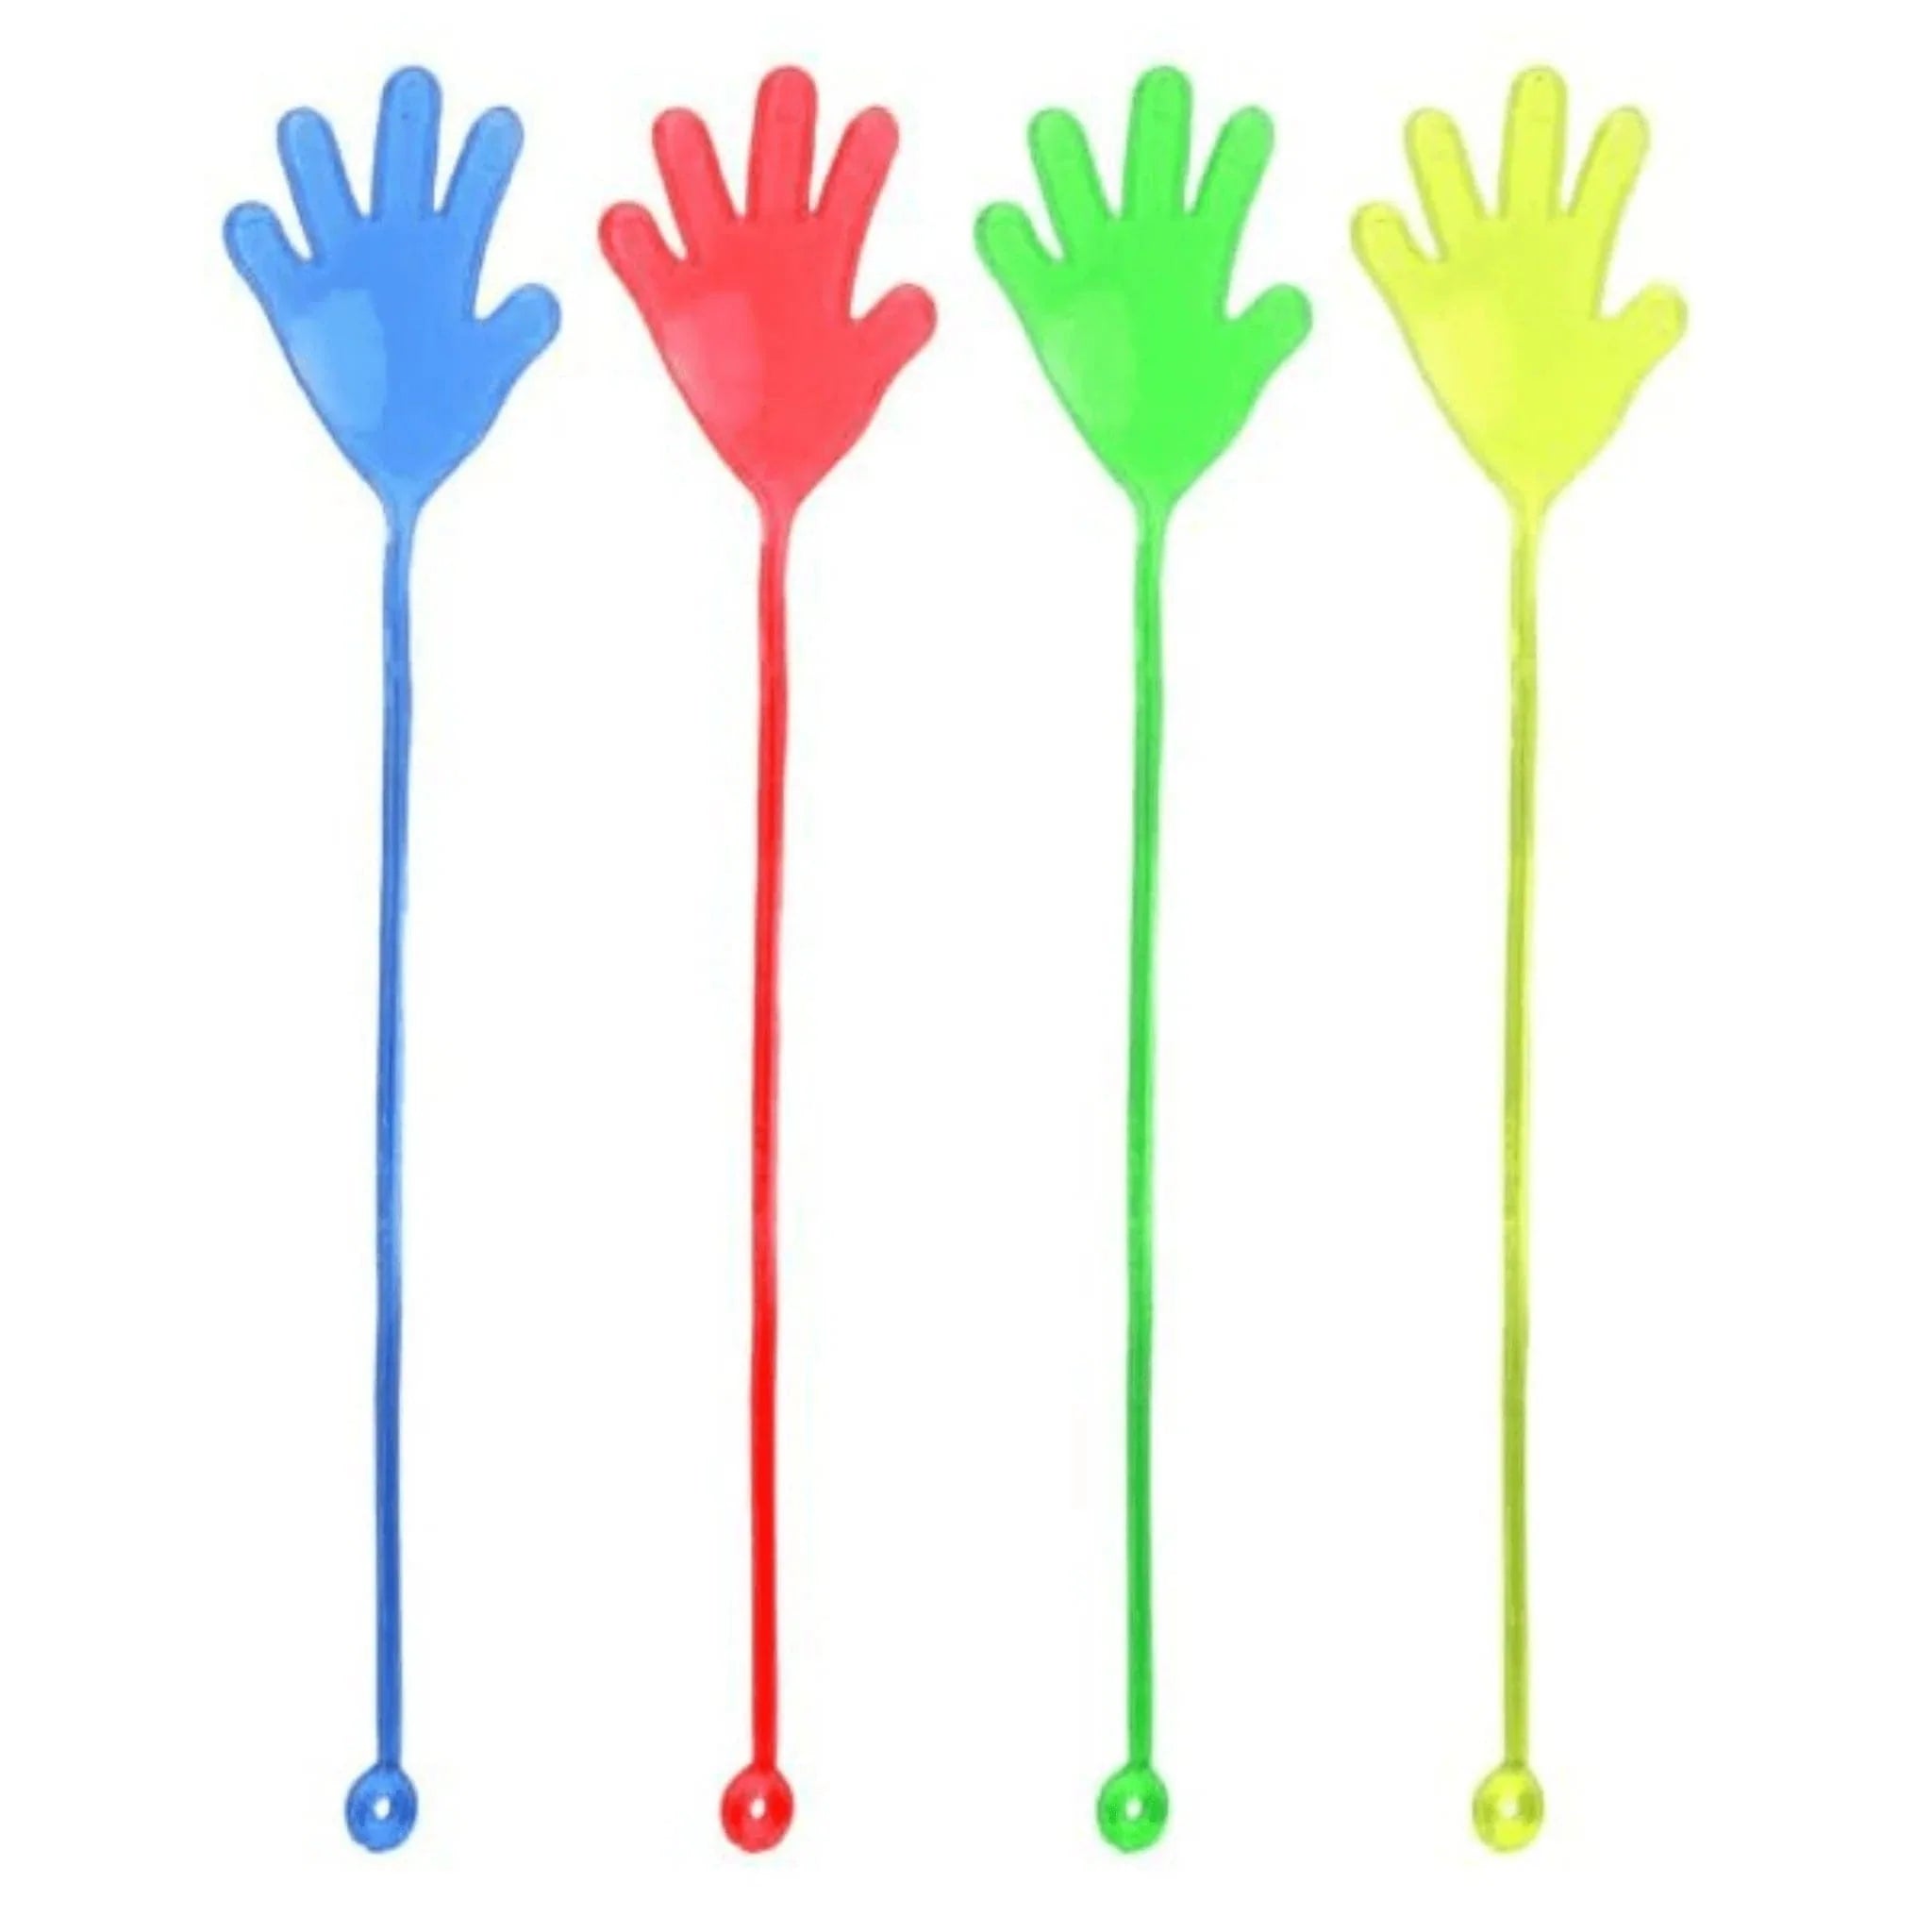 Stretch Sticky Hands with Cord - Kids Party Craft